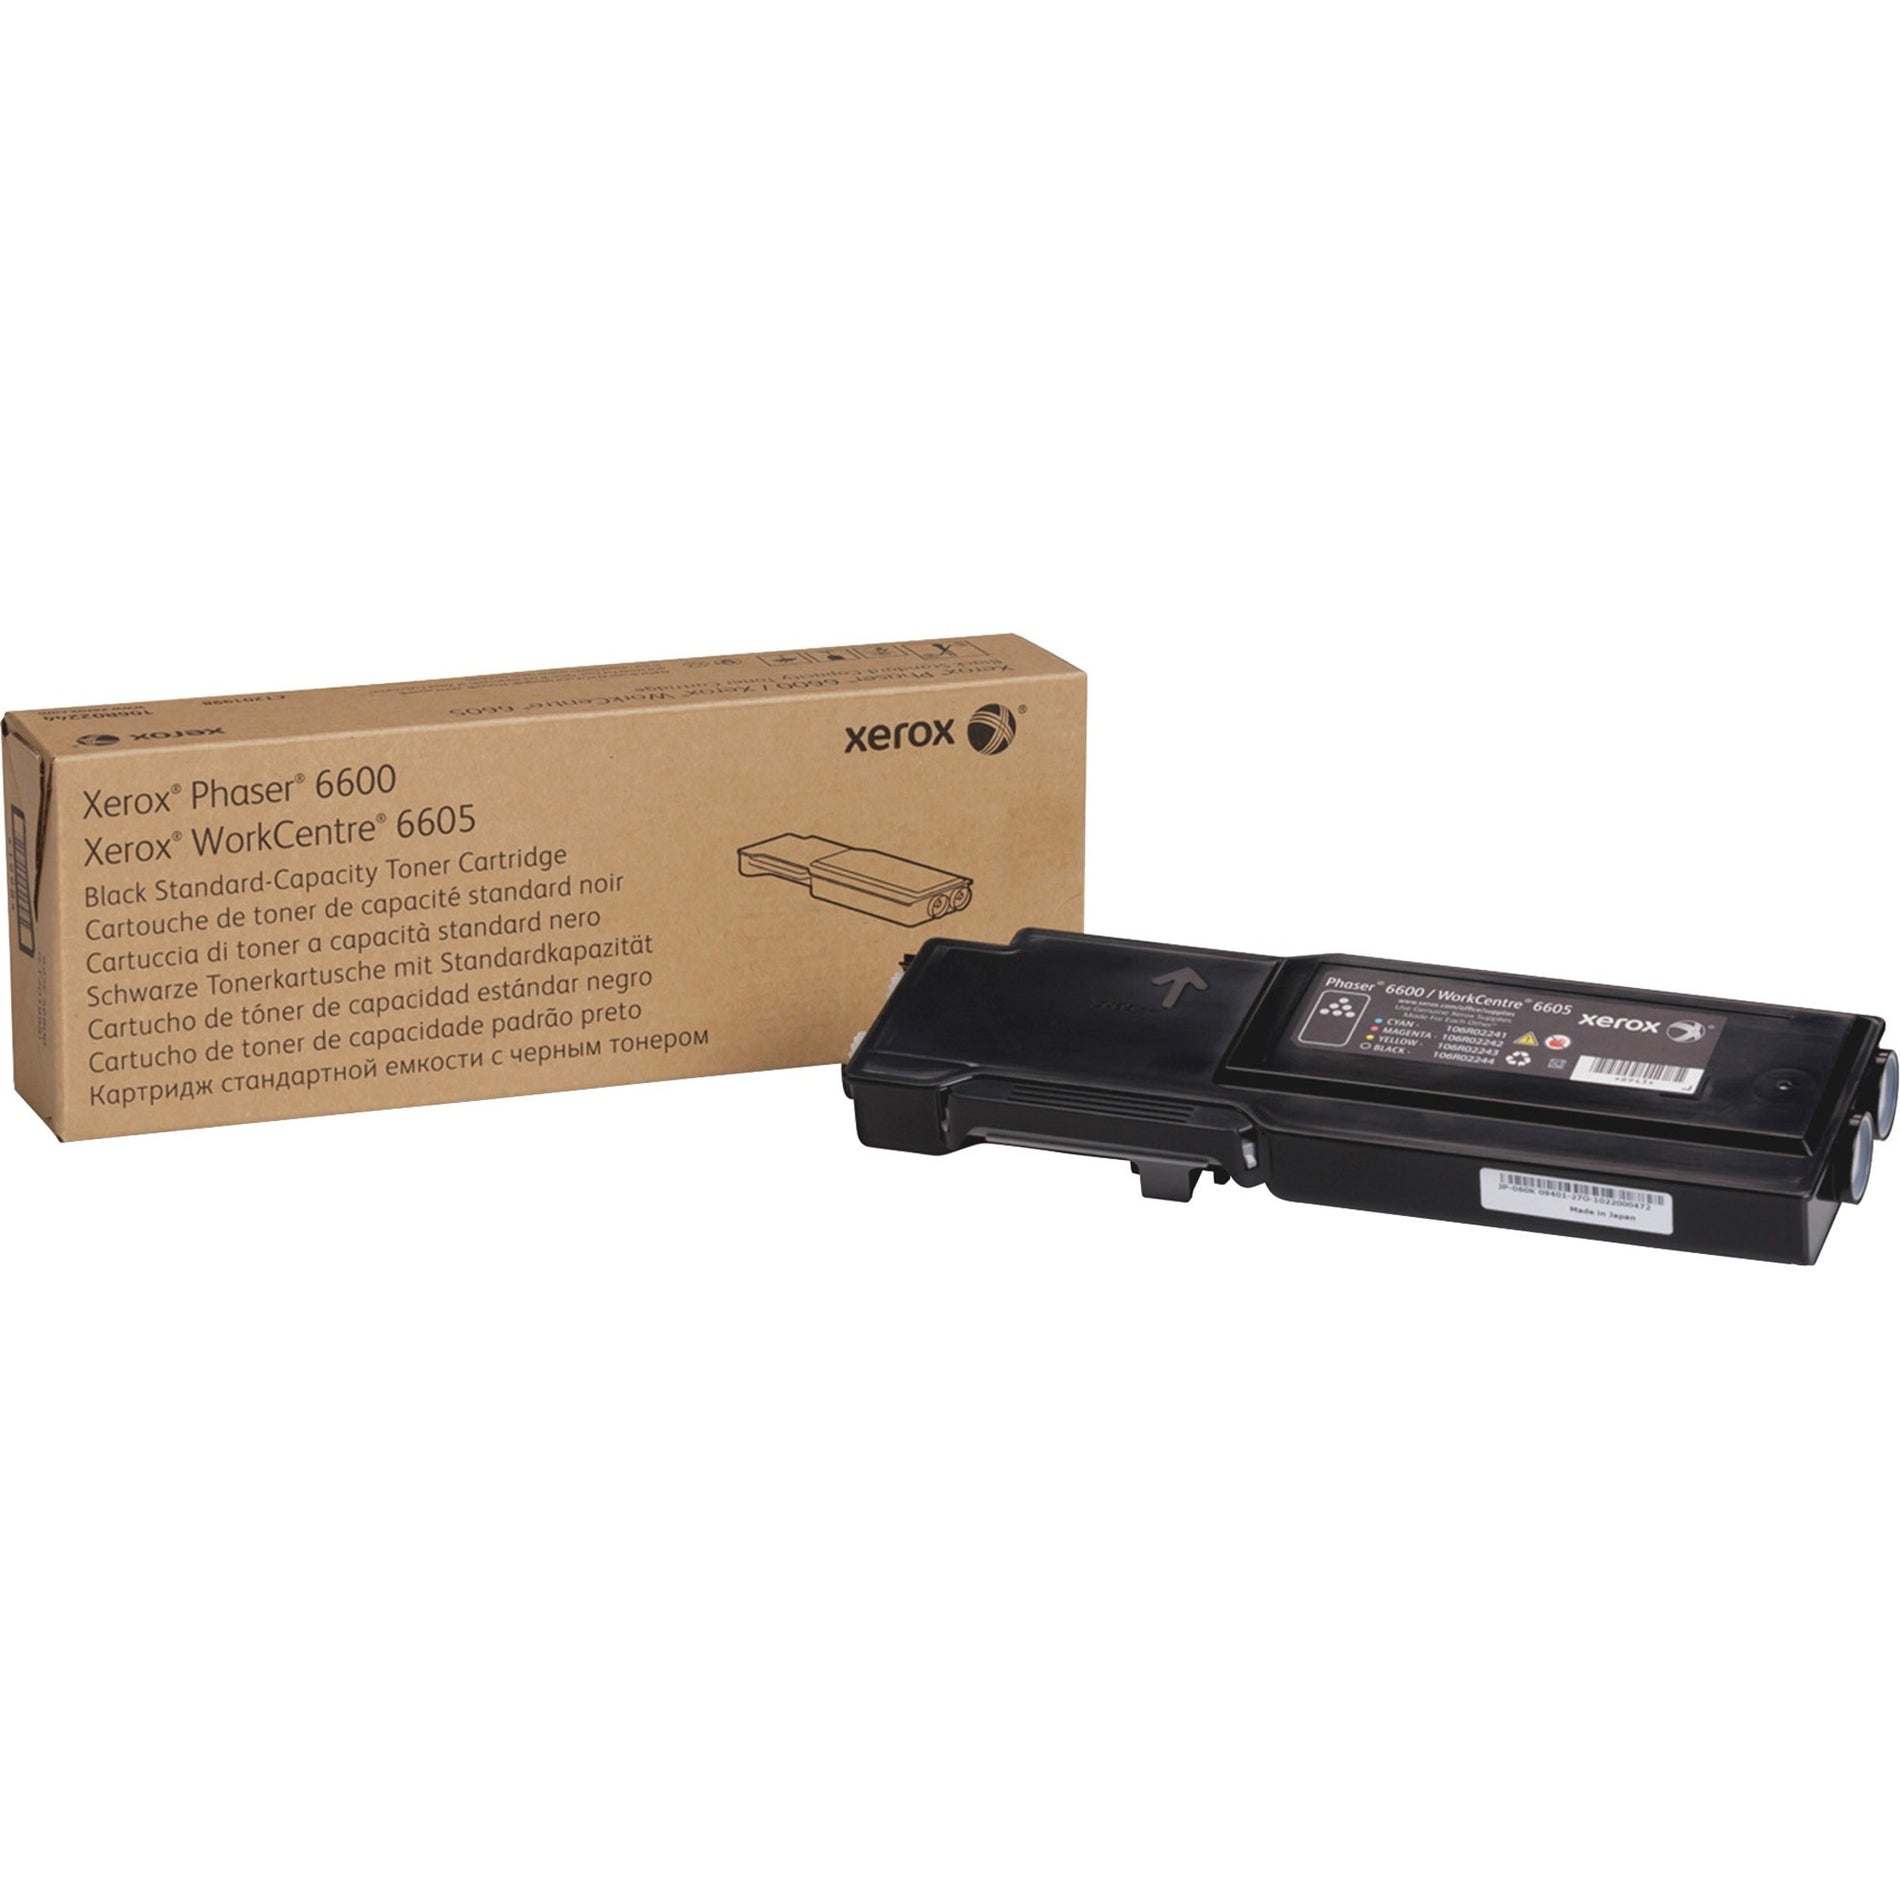 Xerox 106R02244 Phaser 6600/WorkCentre 6605 Standard Toner Cartridge, 3,000 Page Yield, Black